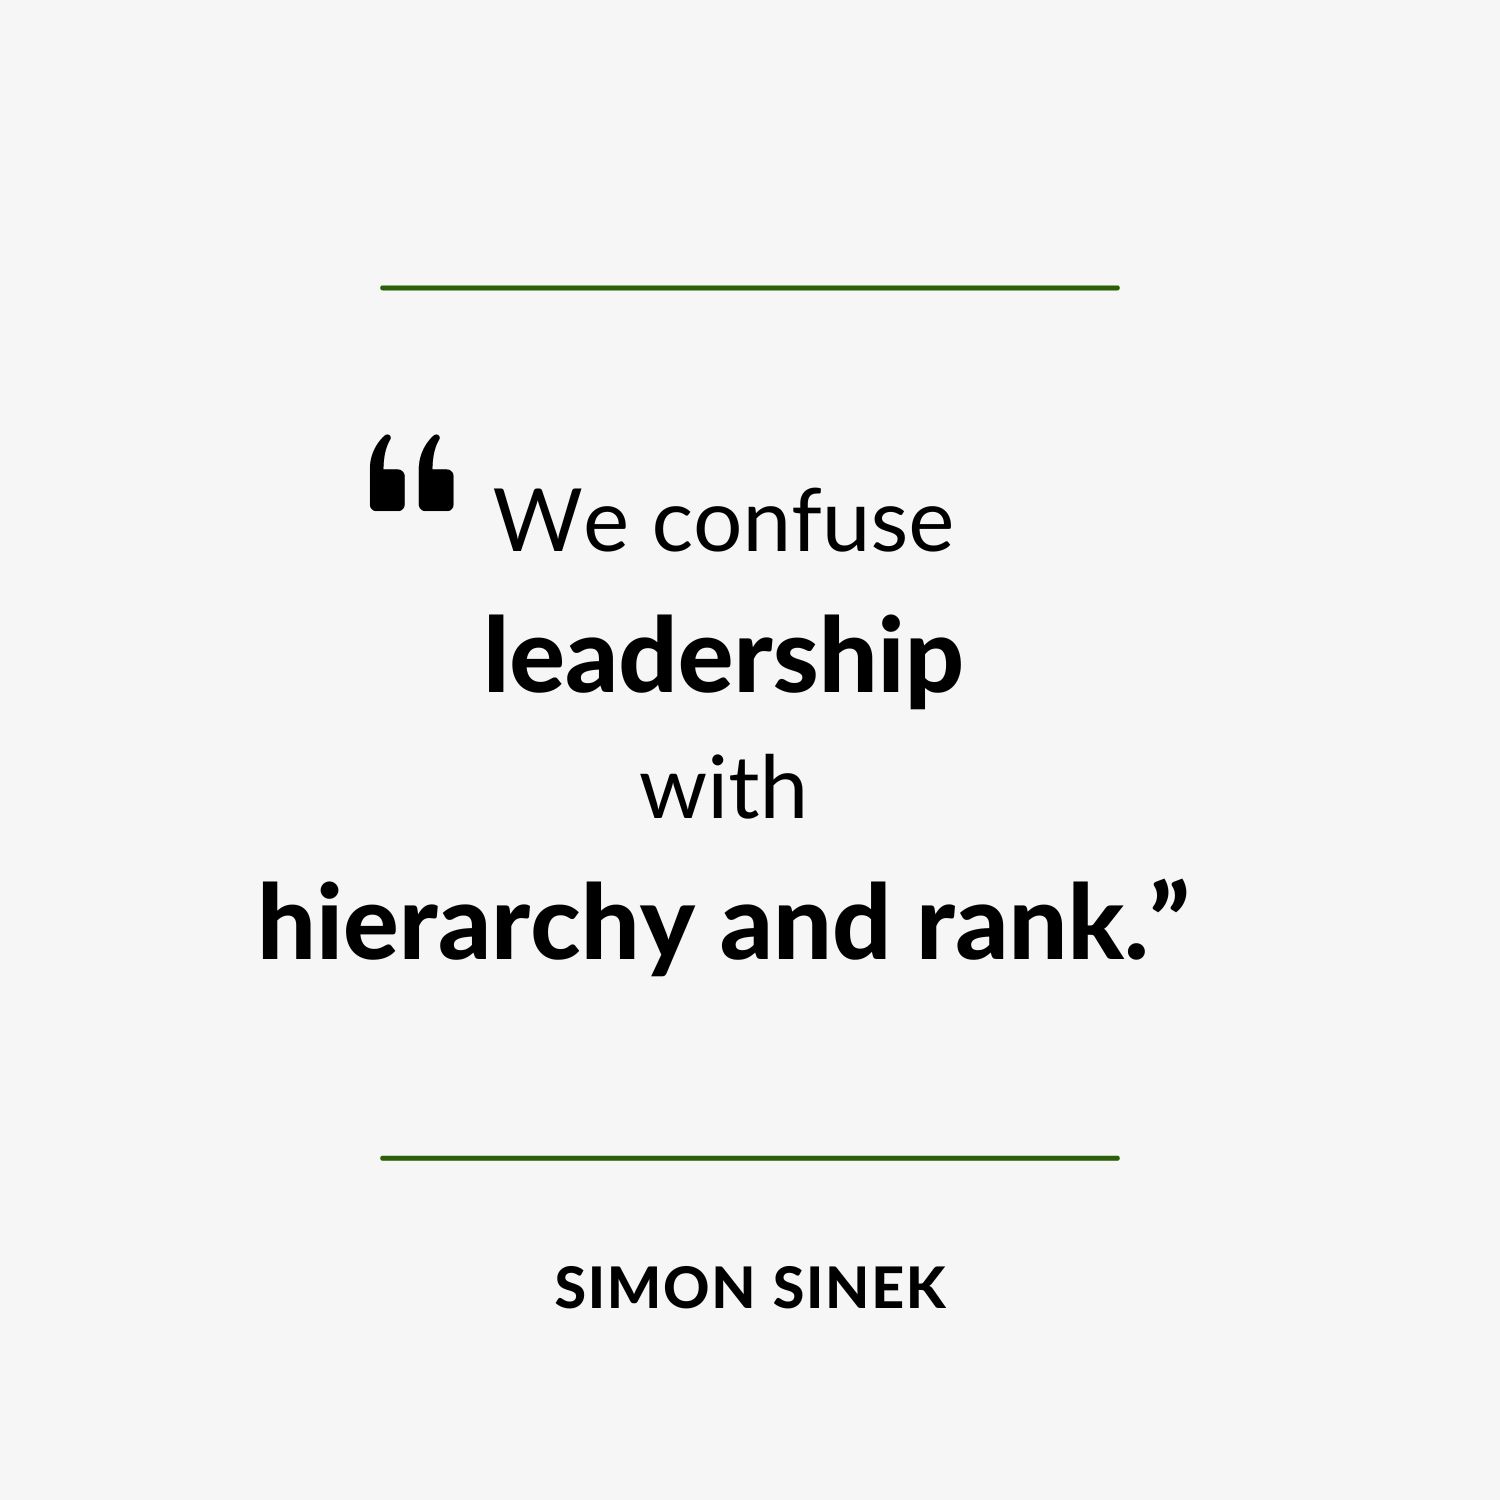 Website Quote - "We confuse leadership with hierarchy and rank.”